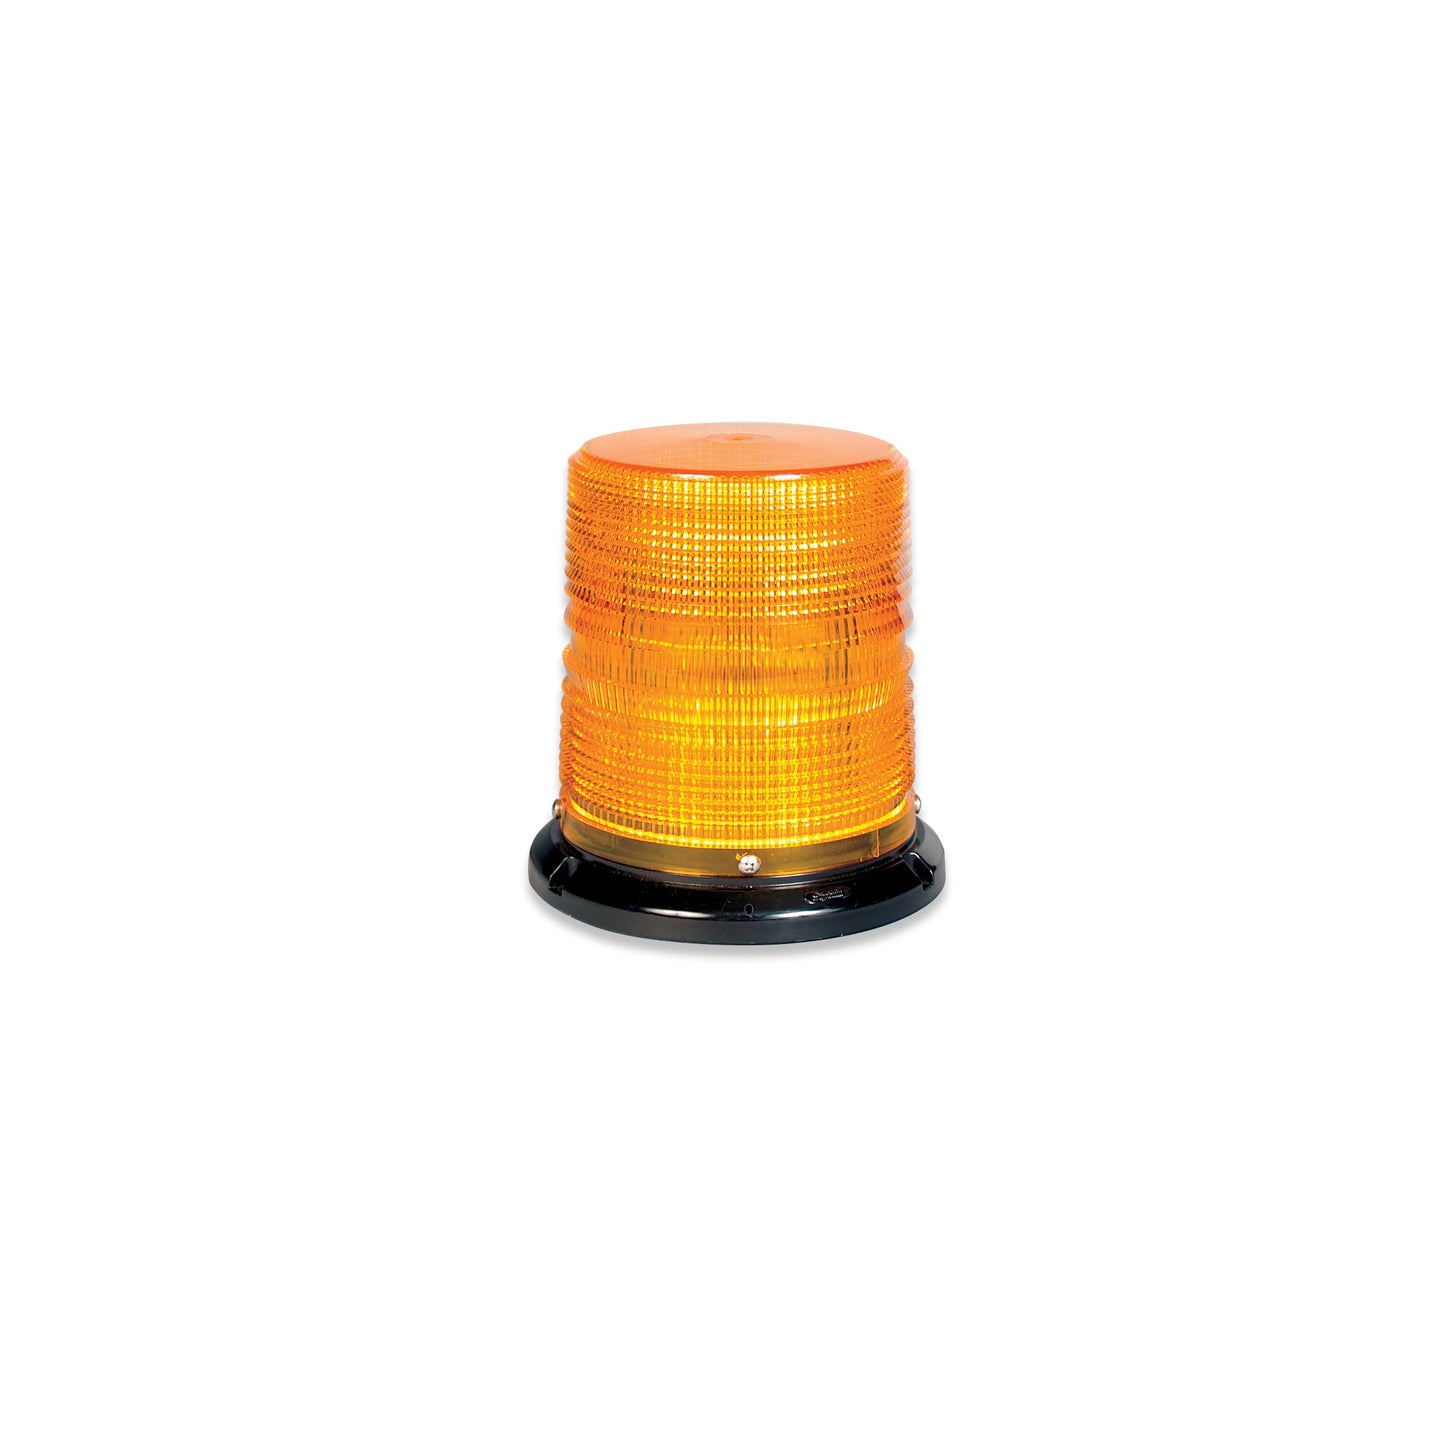 Soundoff Signal ELB45BCH0AA 4500 Series Led Beacon, 10-30V, Sae J845 Class 1 - Flat/Pipe Mount, 6" Amber Dome/ Amber Leds